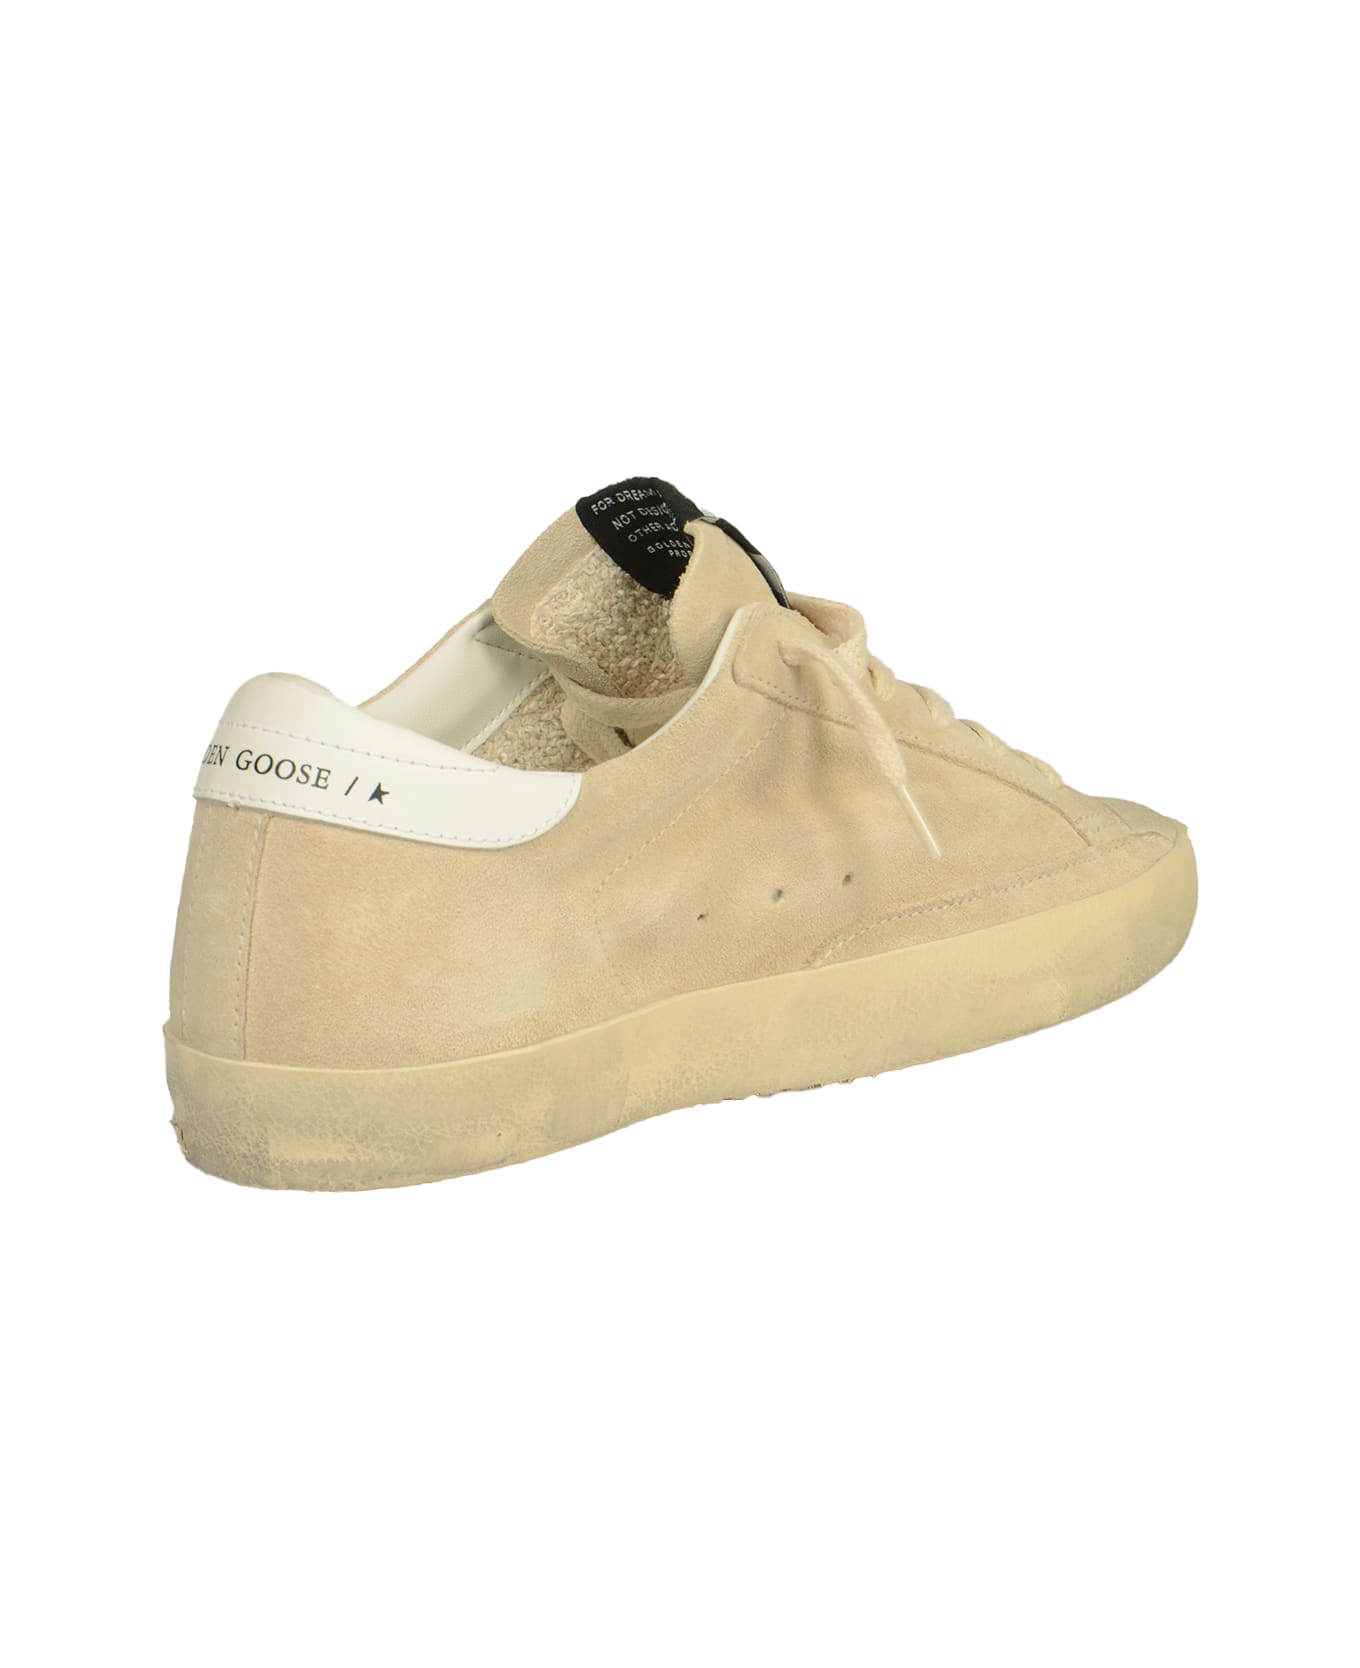 Golden Goose Super-star Classic Sneakers - Seed Pearl/White